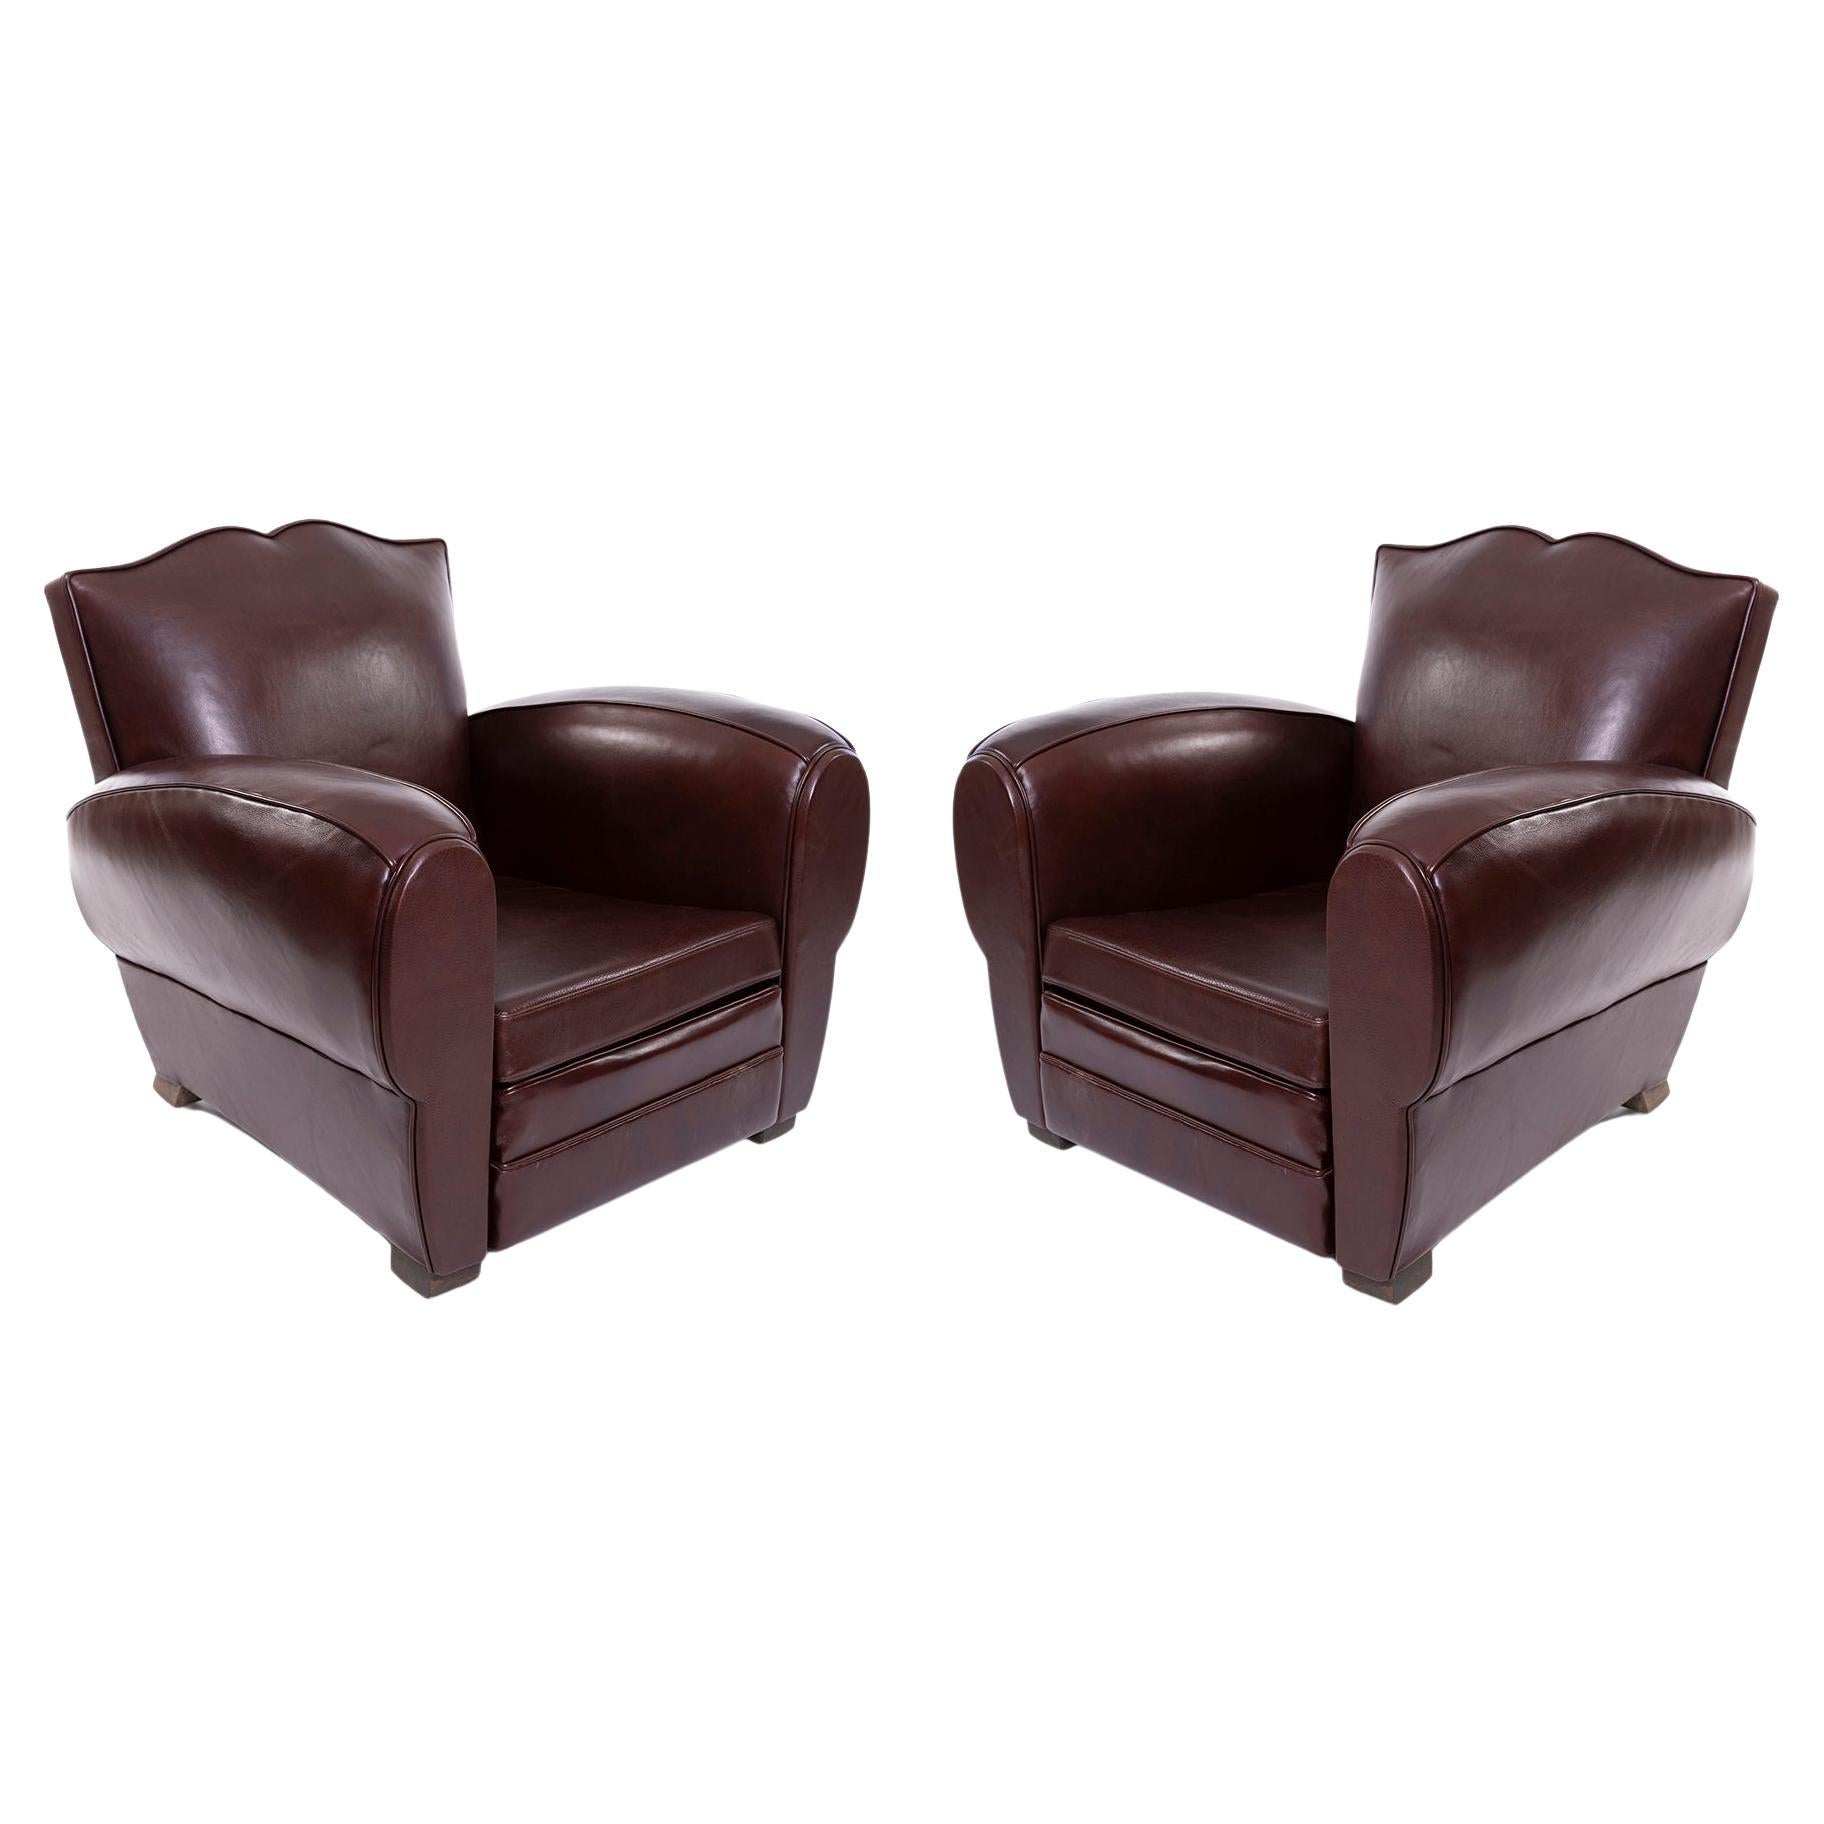 Deco 1930s Leather Lounge Chairs from France